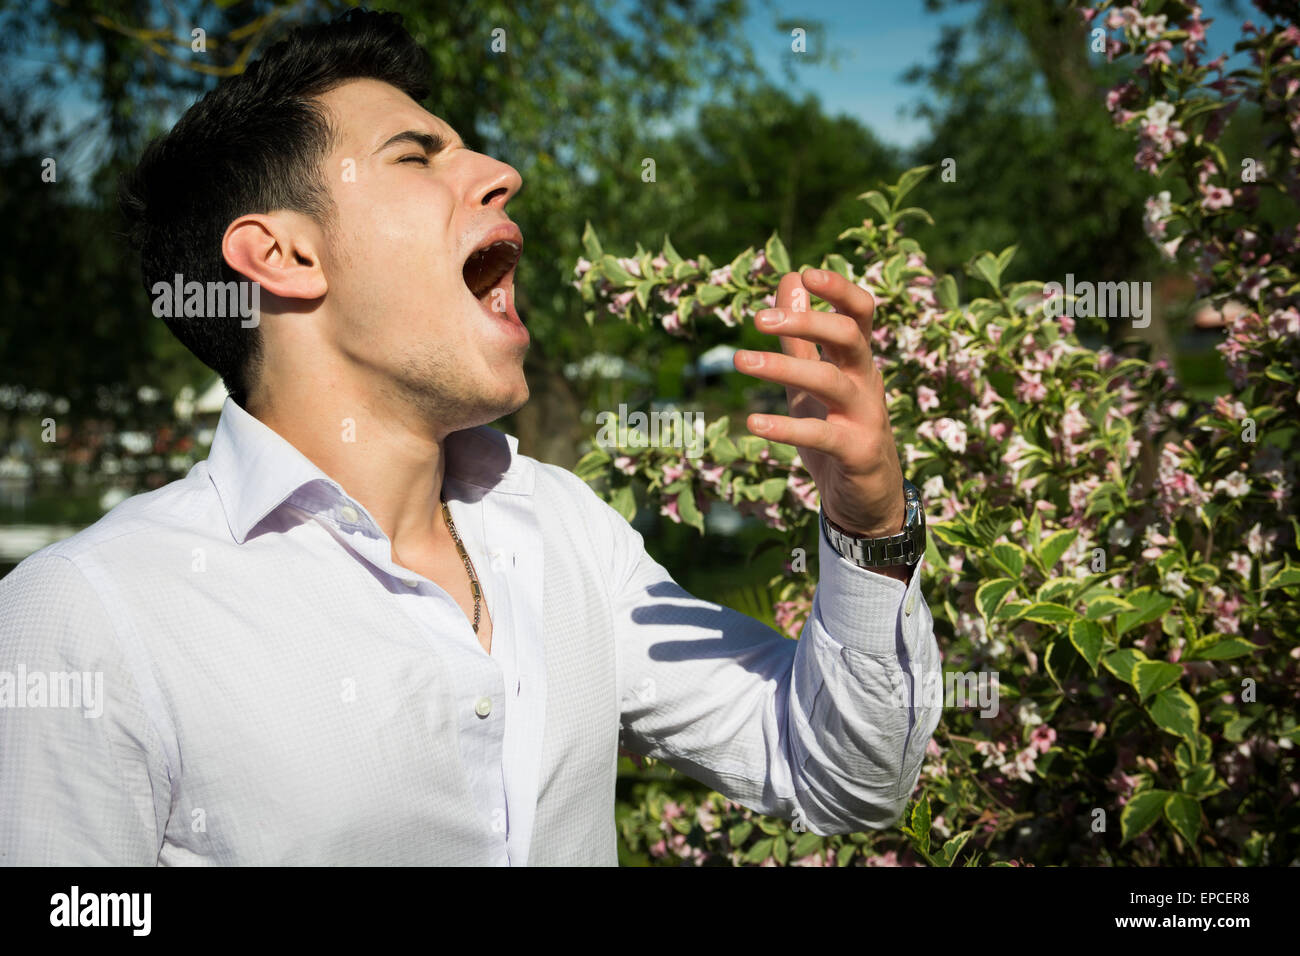 Attractive young man next to flowers sneezing because of hay-fever allergy Stock Photo